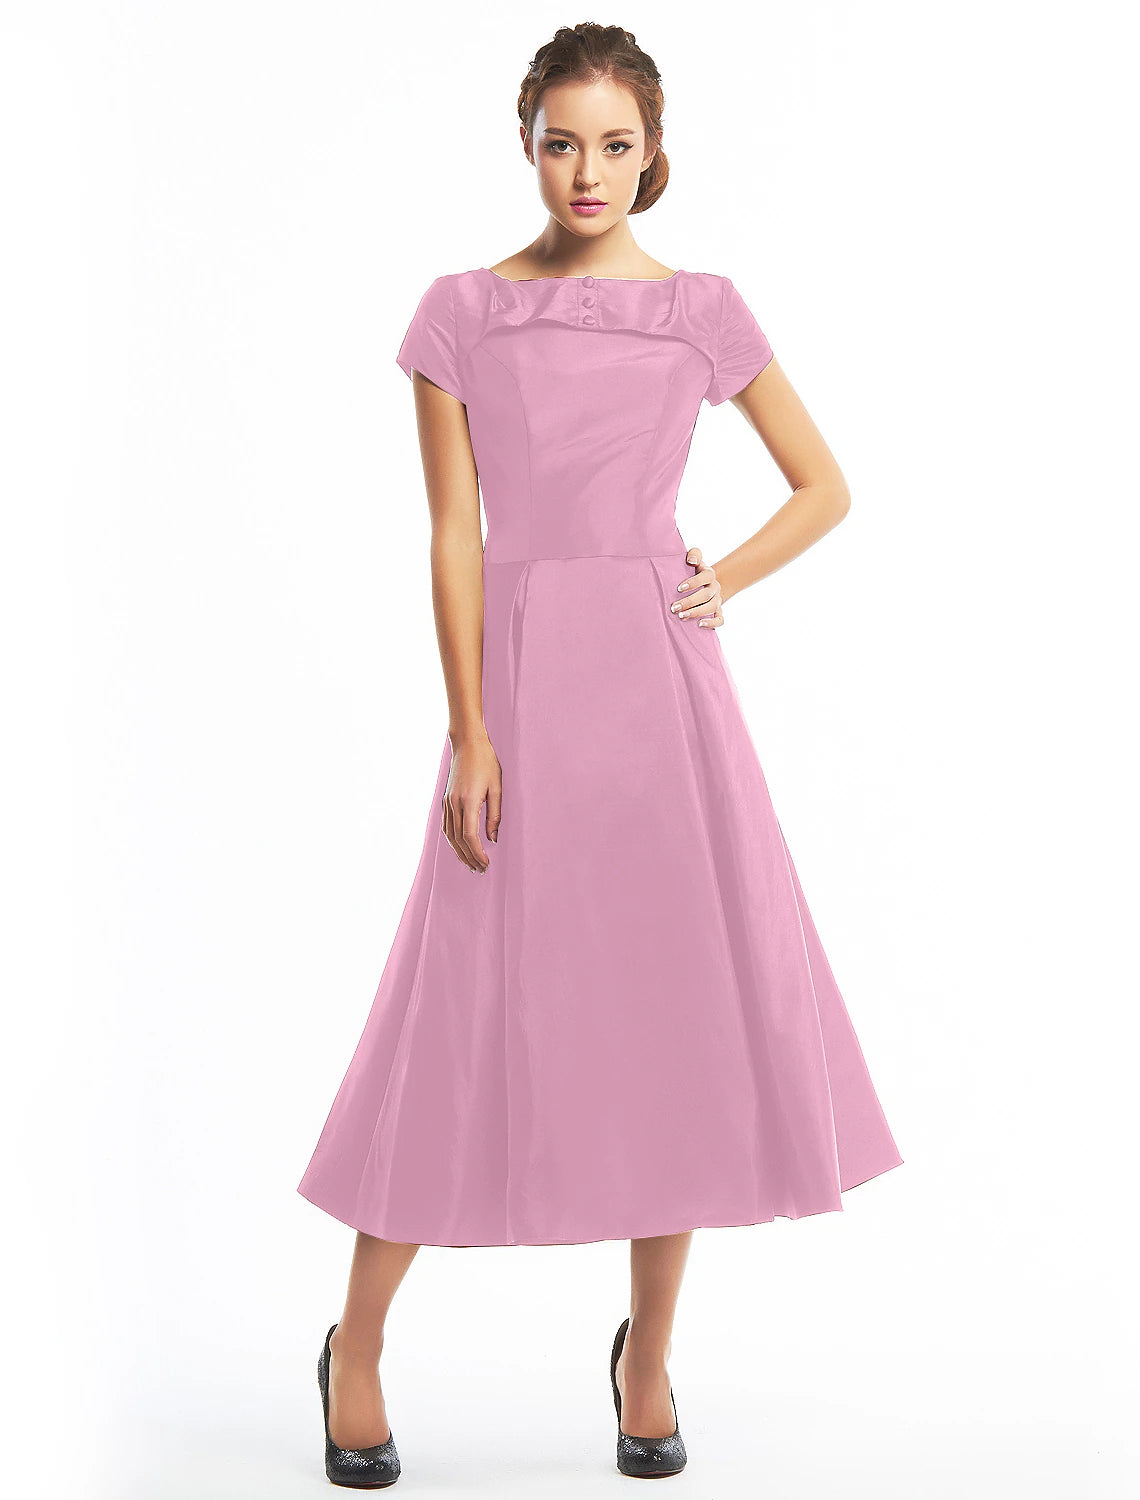 A-Line Vintage Dress Homecoming Tea Length Short Sleeve Boat Neck Taffeta with Buttons